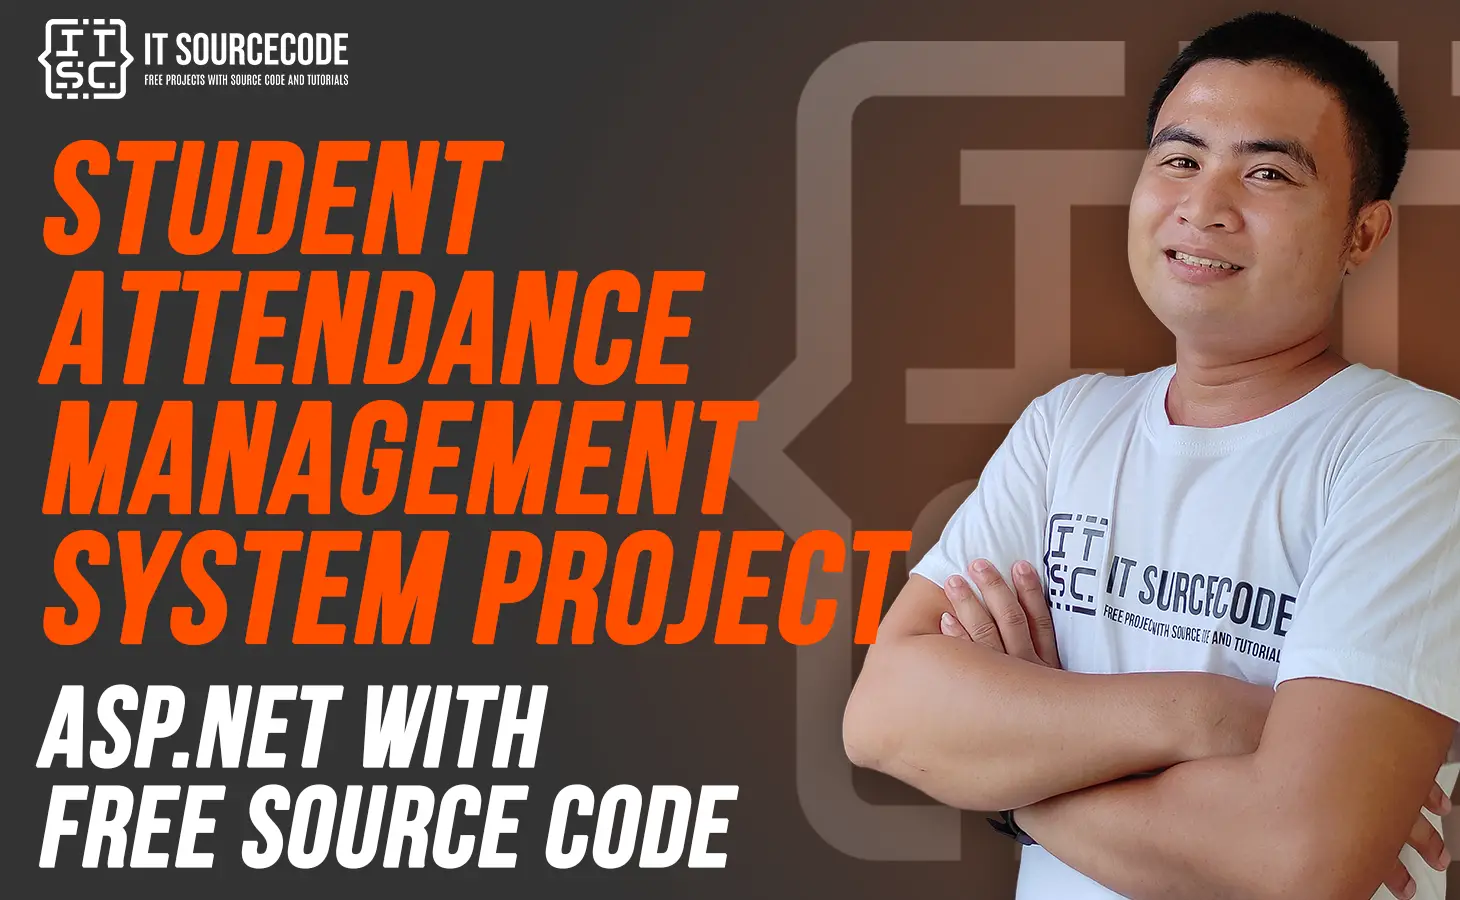 Attendance Management System Software Free Download In ASP NET